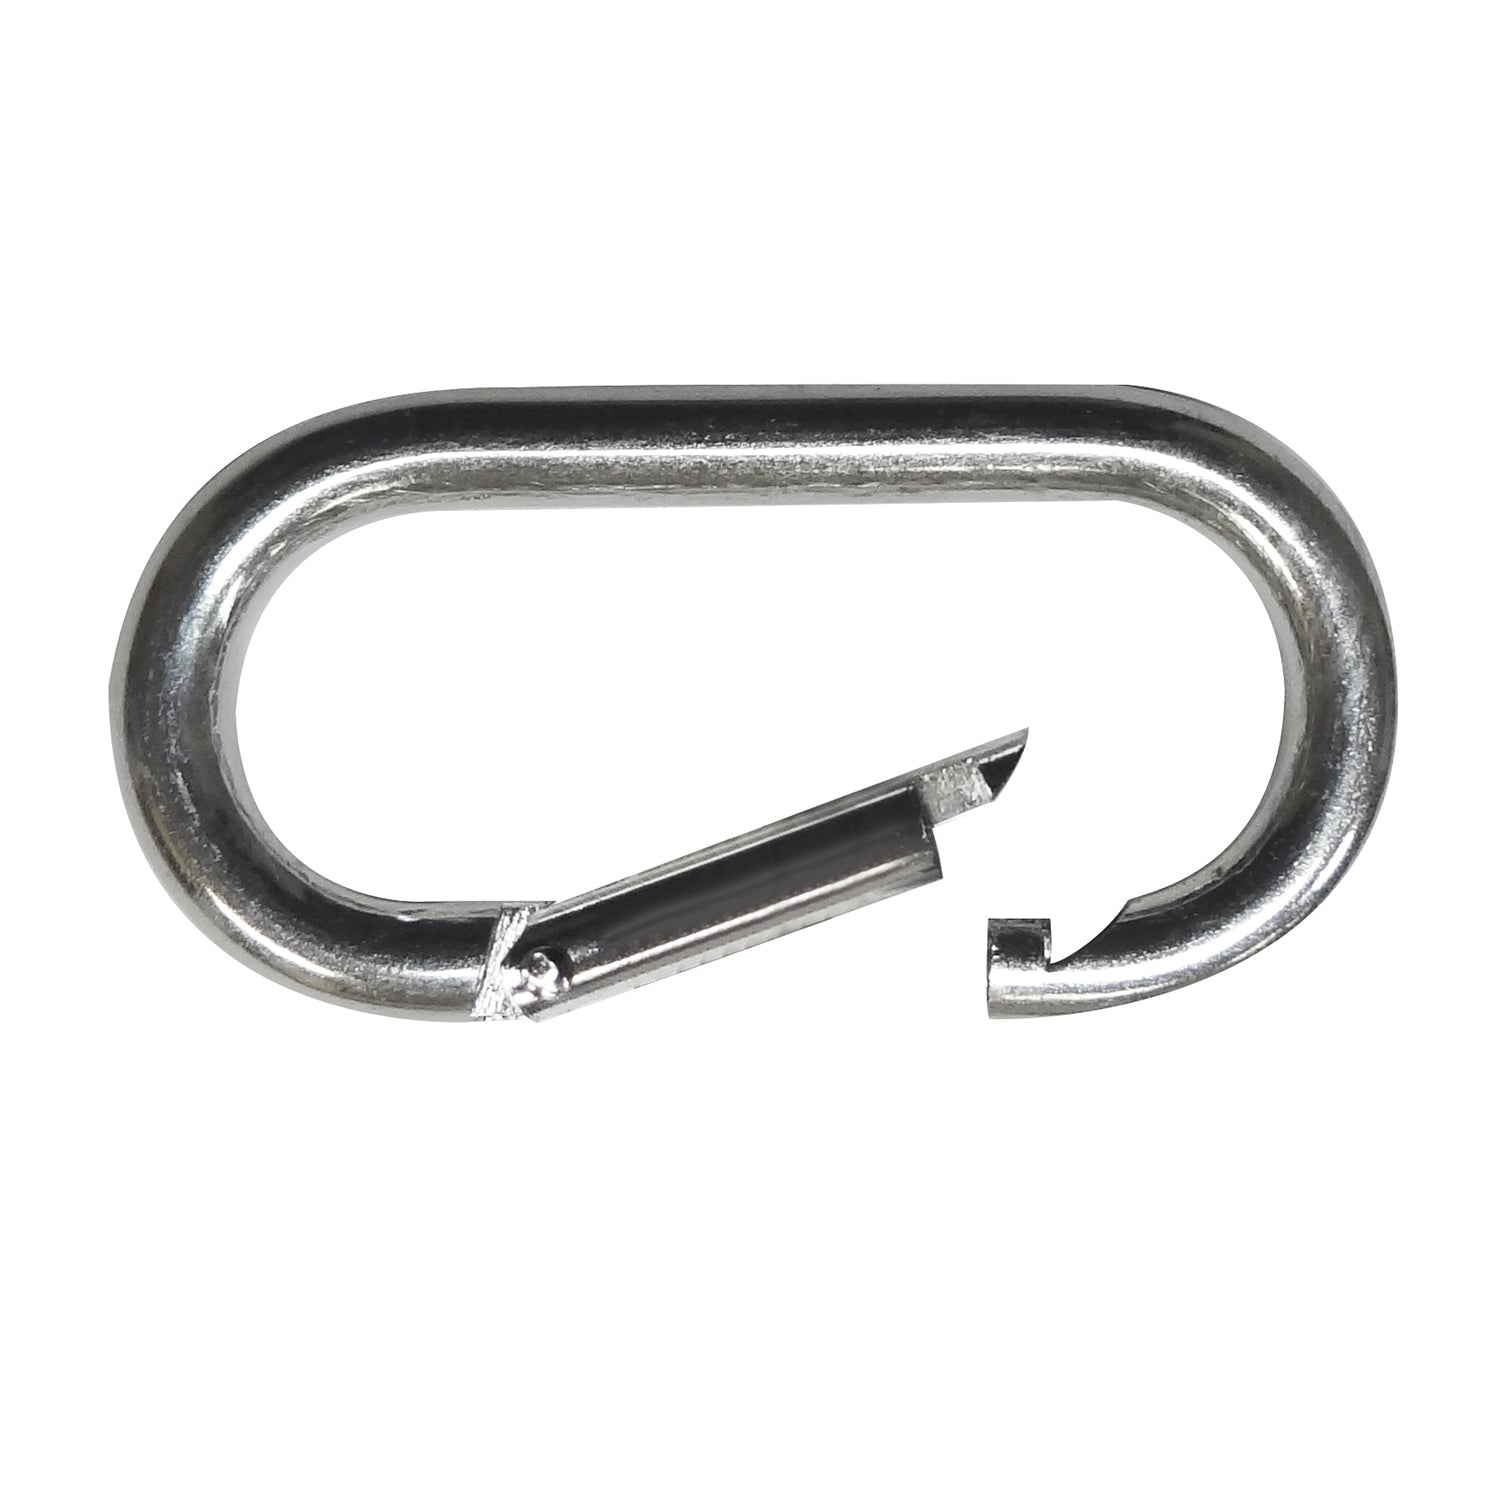 ANSI Certified 23kN Snap Hook With Twist Lock (ANSI) with 3600LBS Gate  Strength - 449g